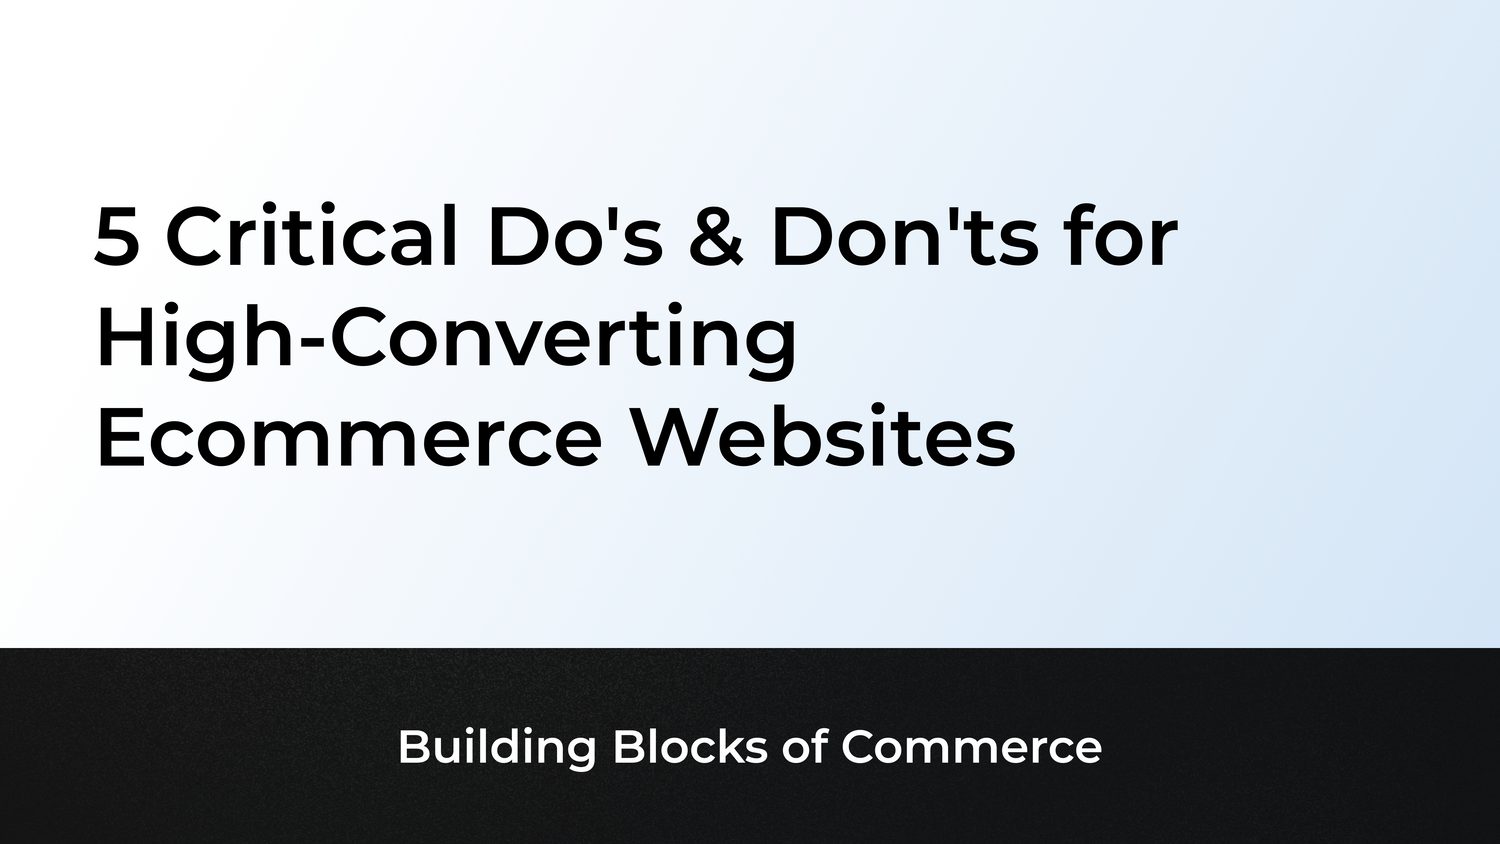 5 Critical Do's & Don'ts for High-Converting Ecommerce Websites